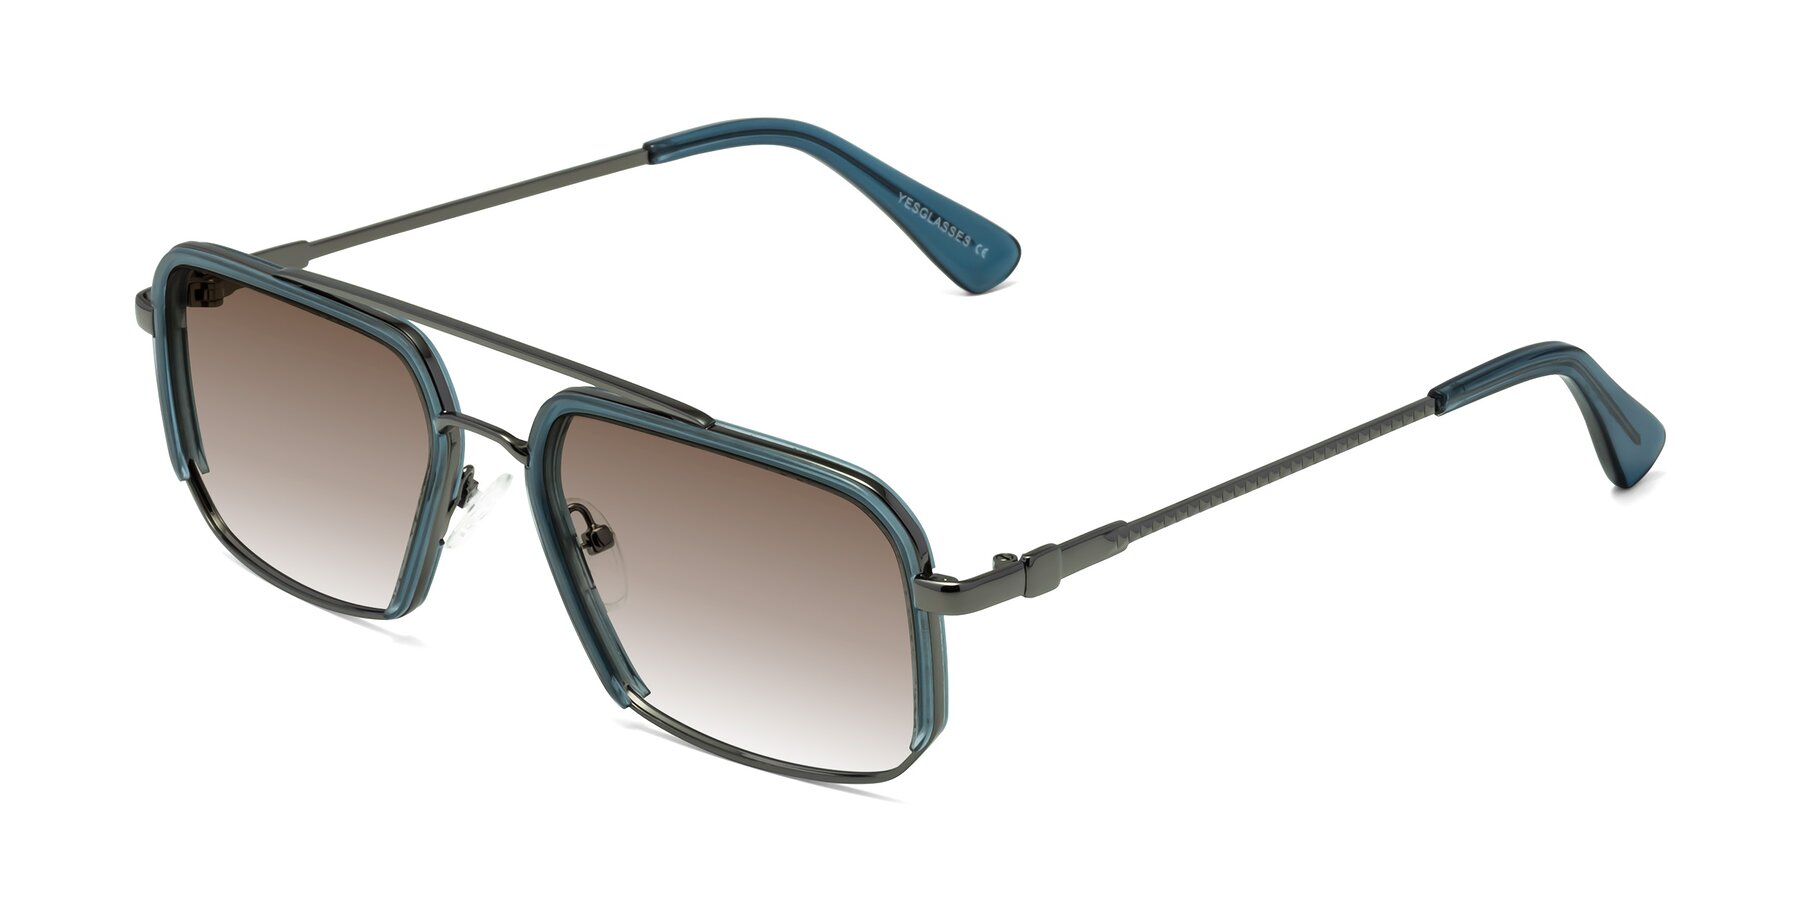 Angle of Dechter in Teal-Gunmetal with Brown Gradient Lenses